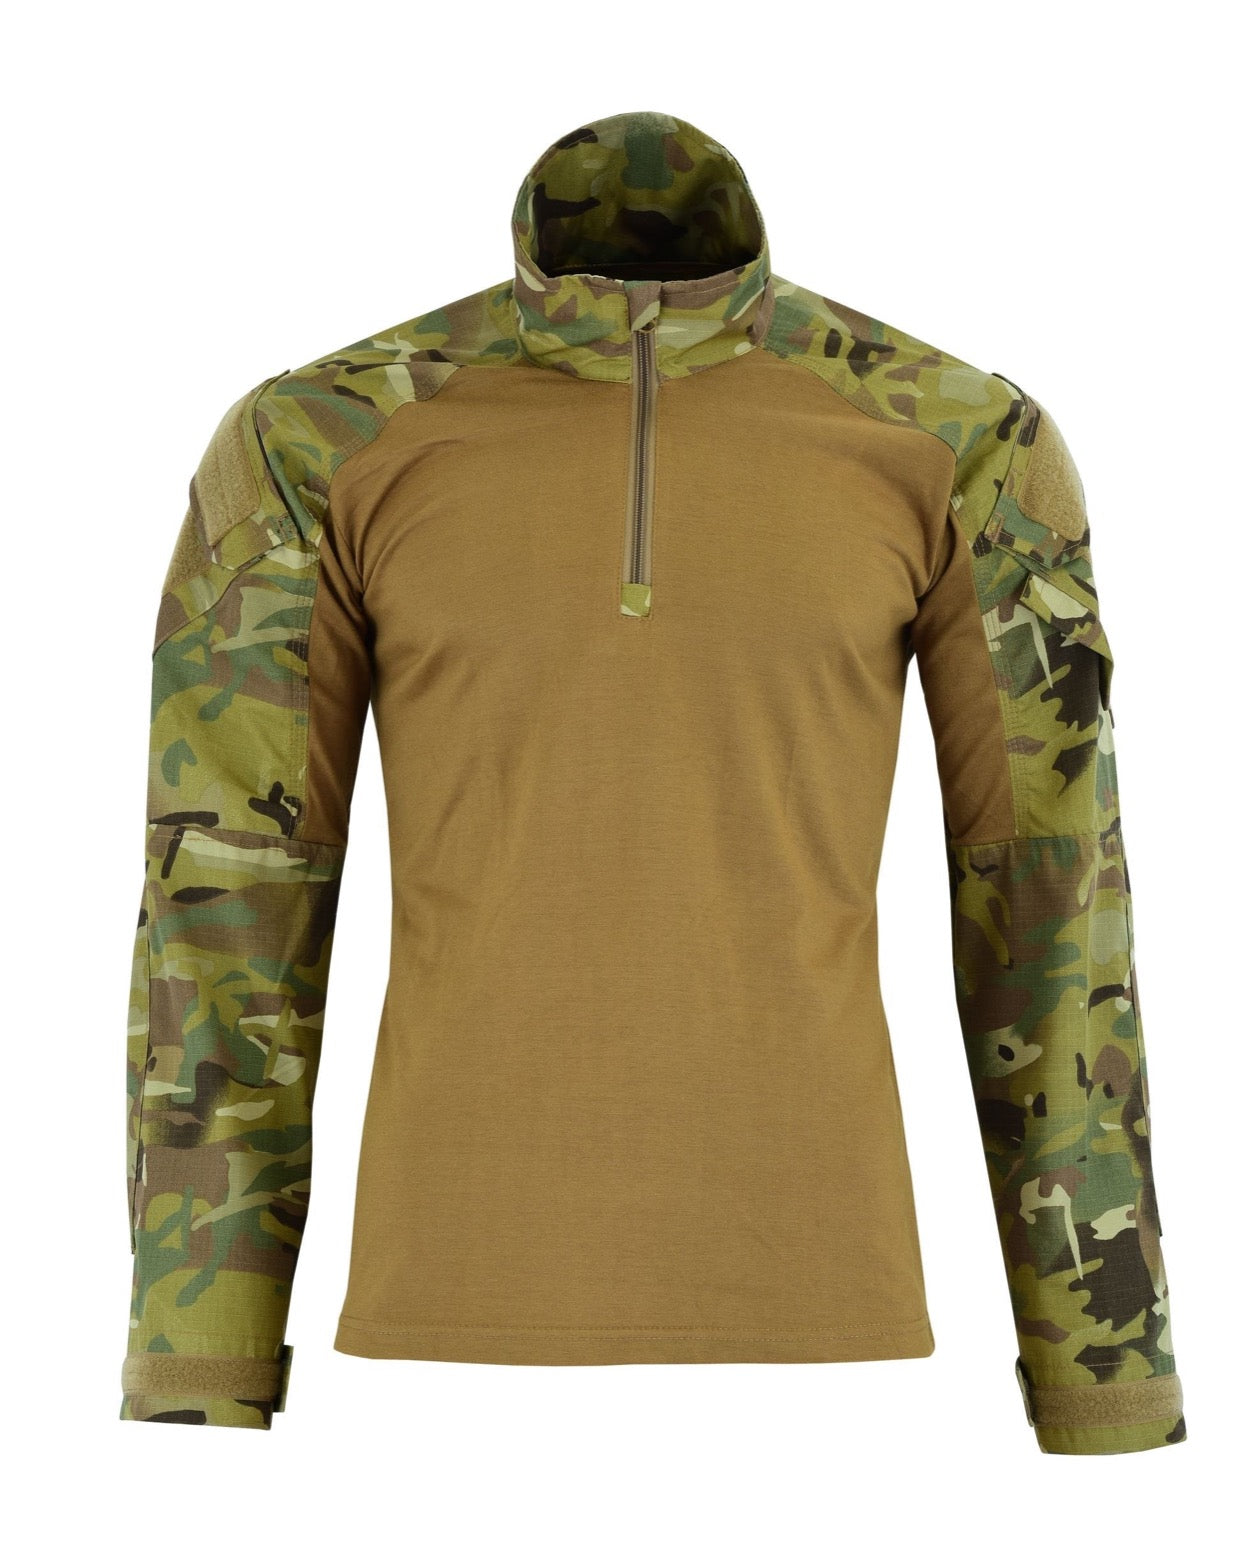 HYBRID TACTICAL SHIRT IS A PERFECT COMBAT SHIRT Colour UTP Front with color